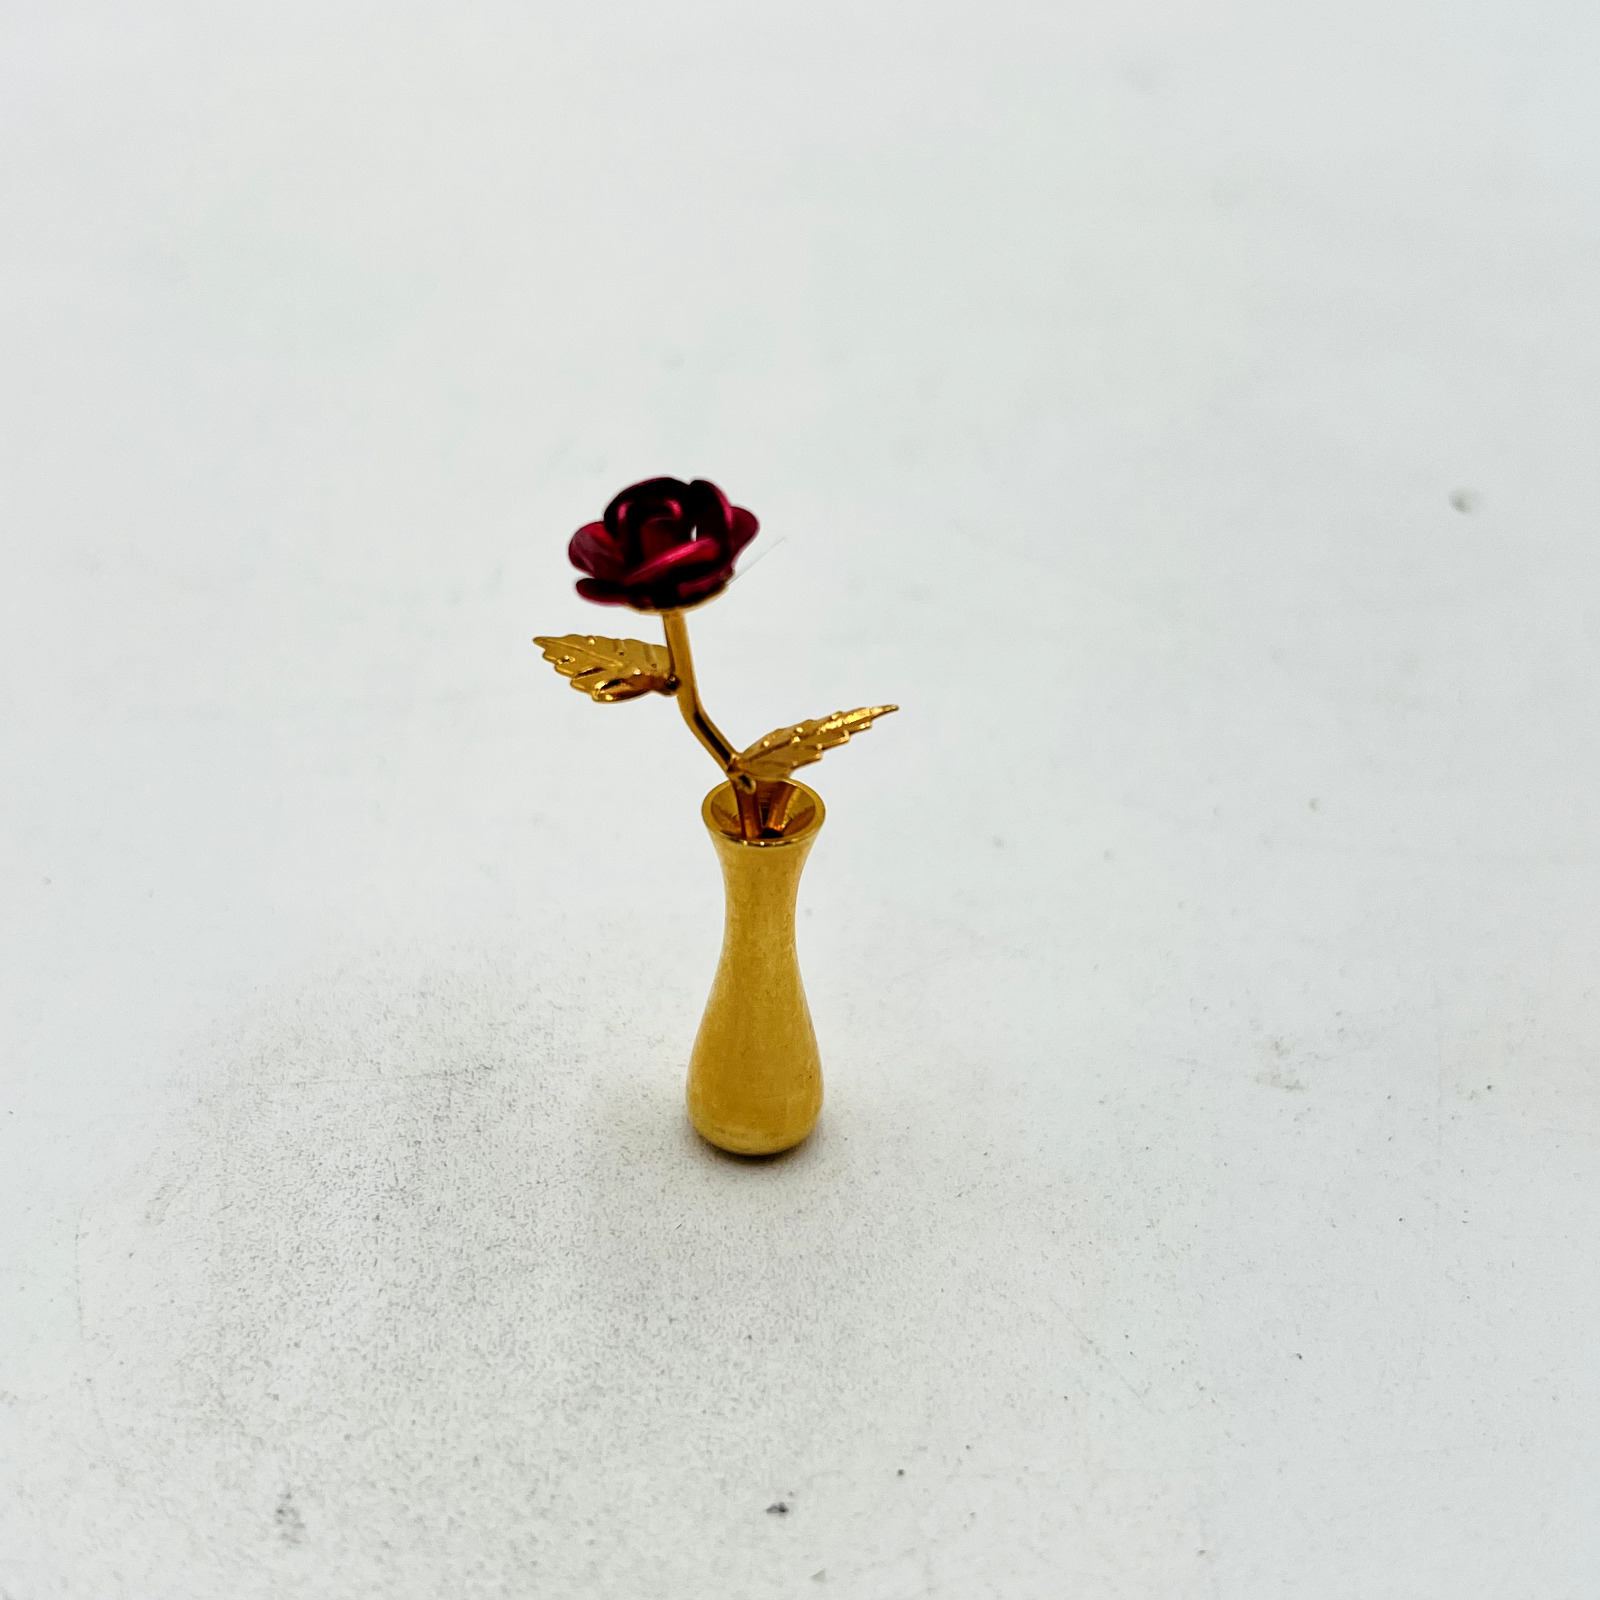 Vintage Miniature Antique Brass Doll House Bud Vase with Red Rose